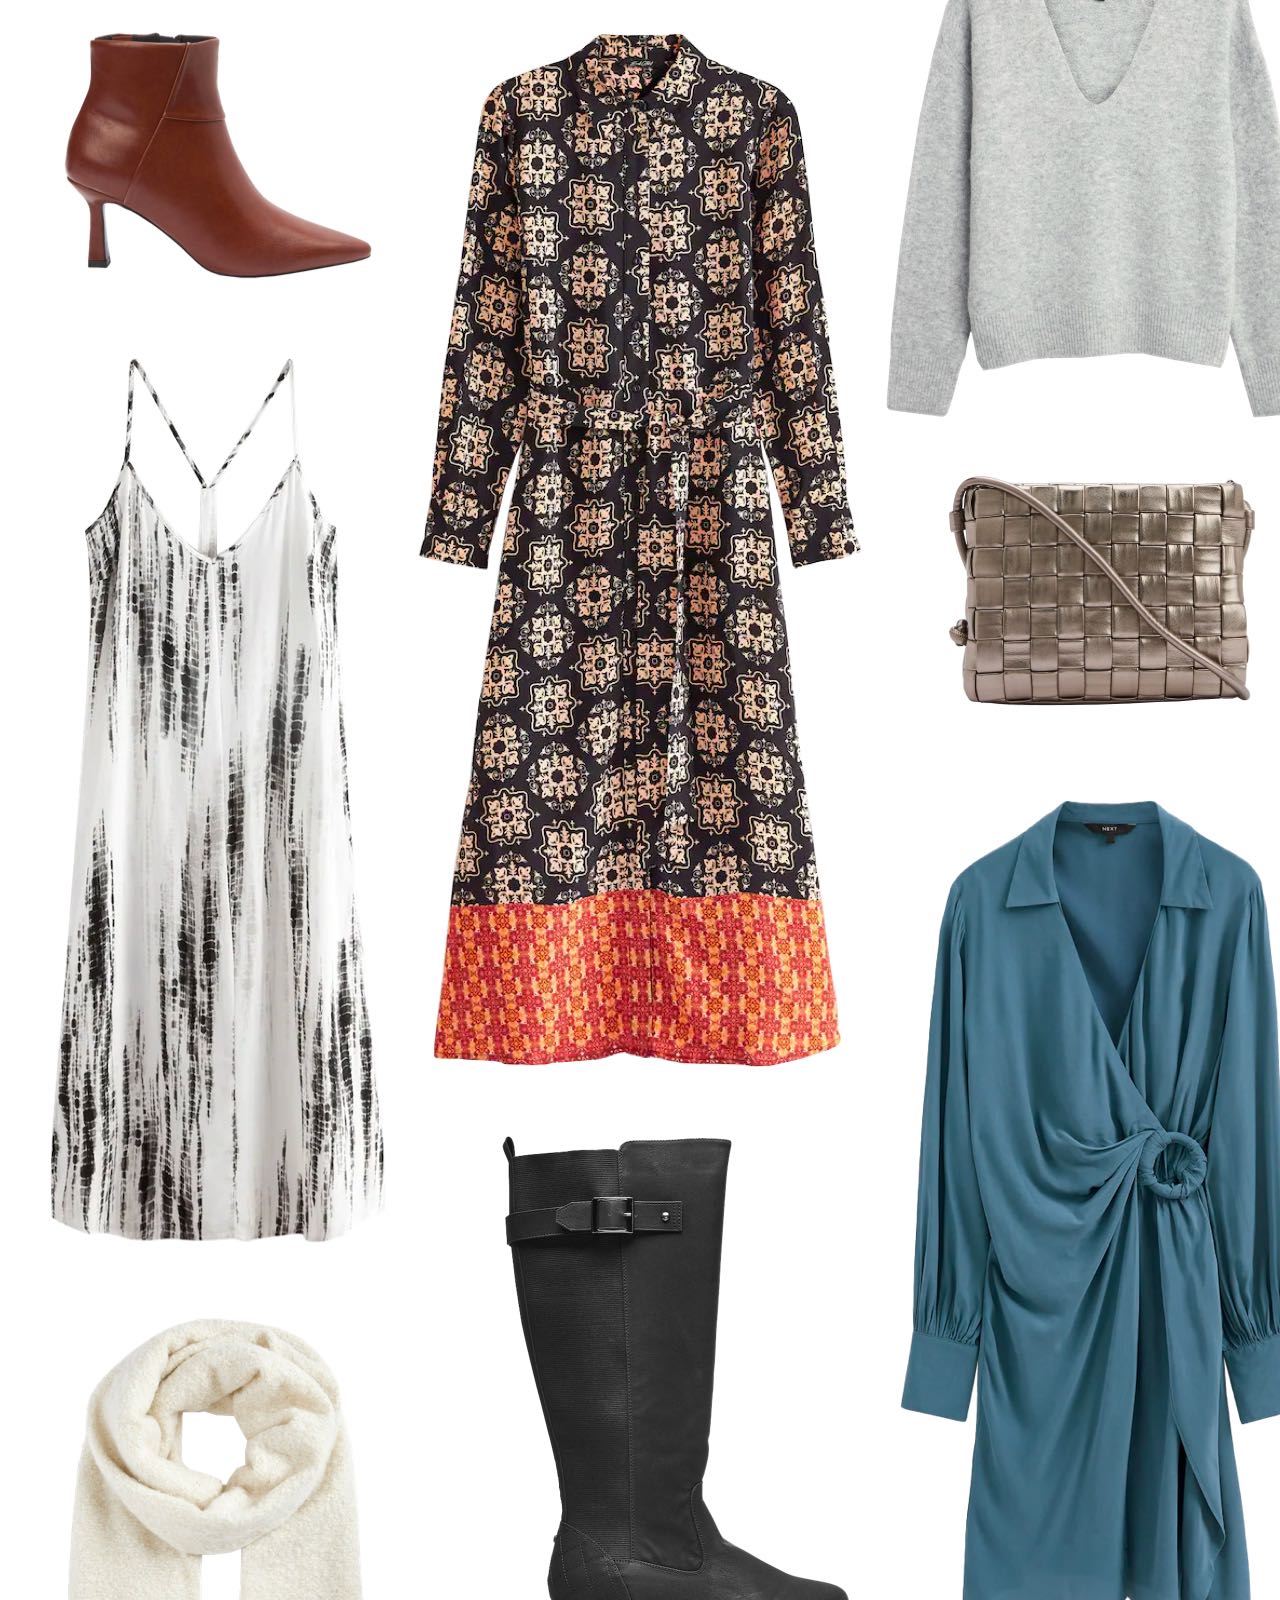 How To Style a Dress In Winter